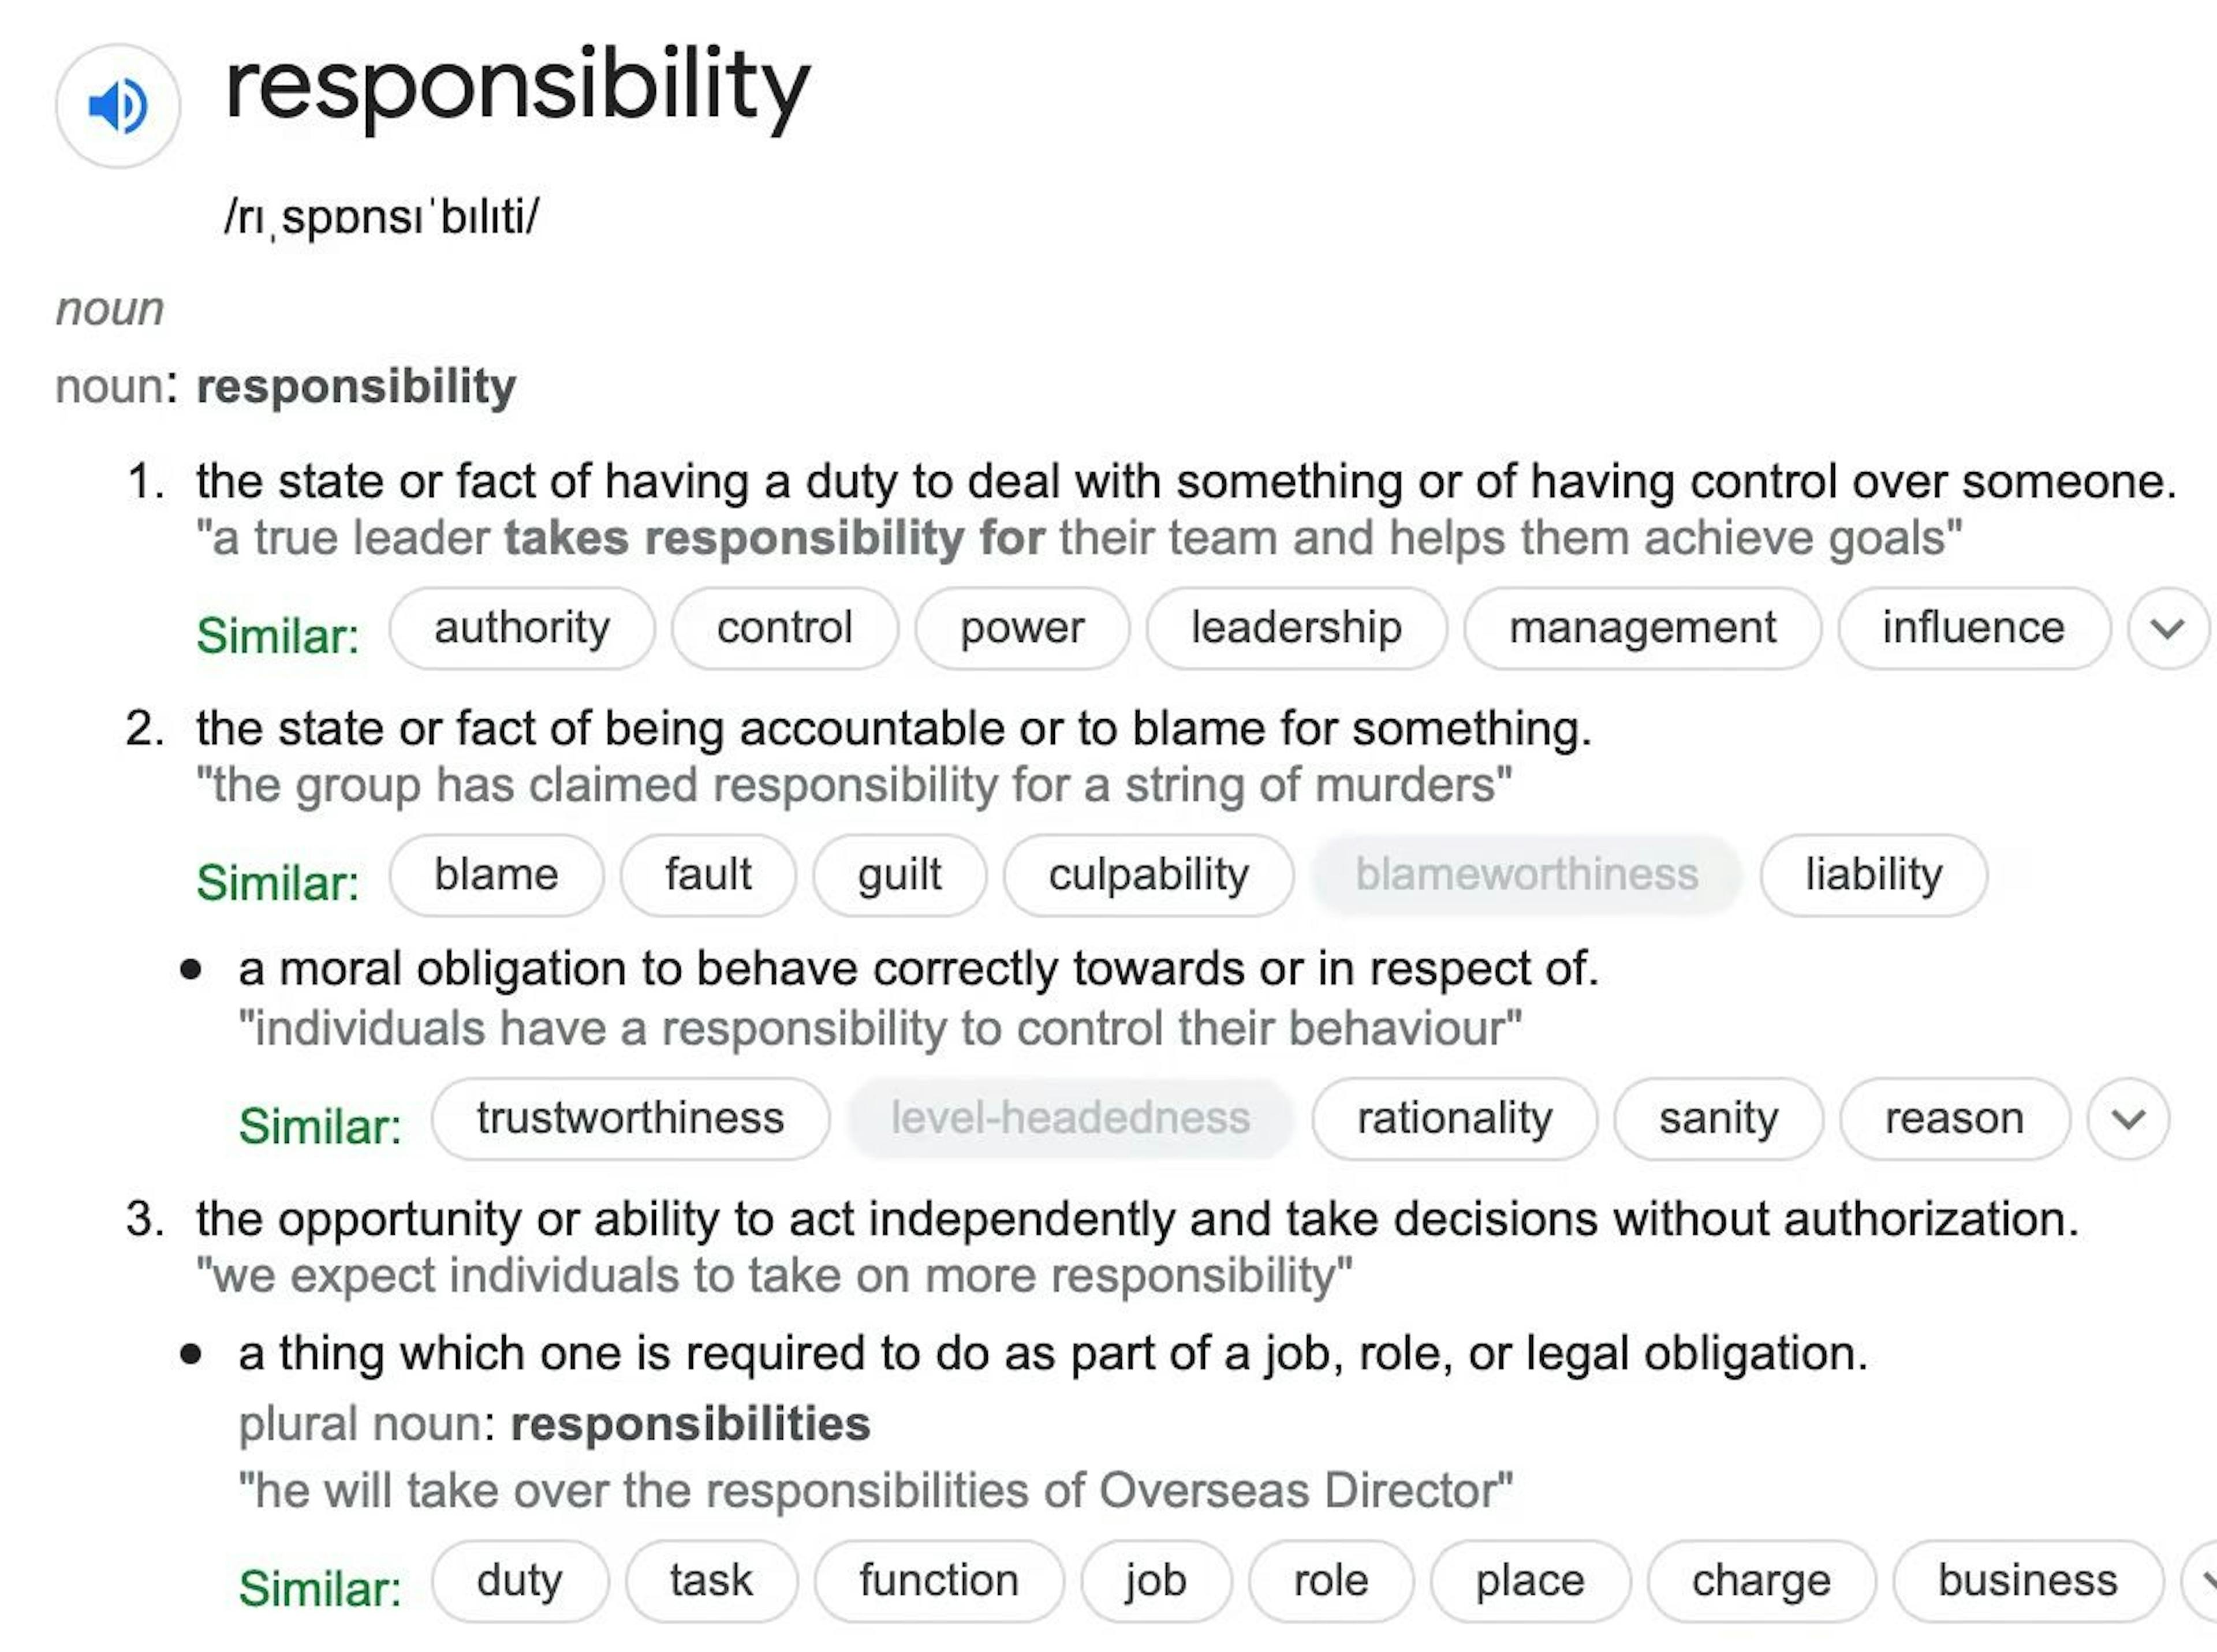 featured image - What Do You Mean When You Say "Take Responsibility"